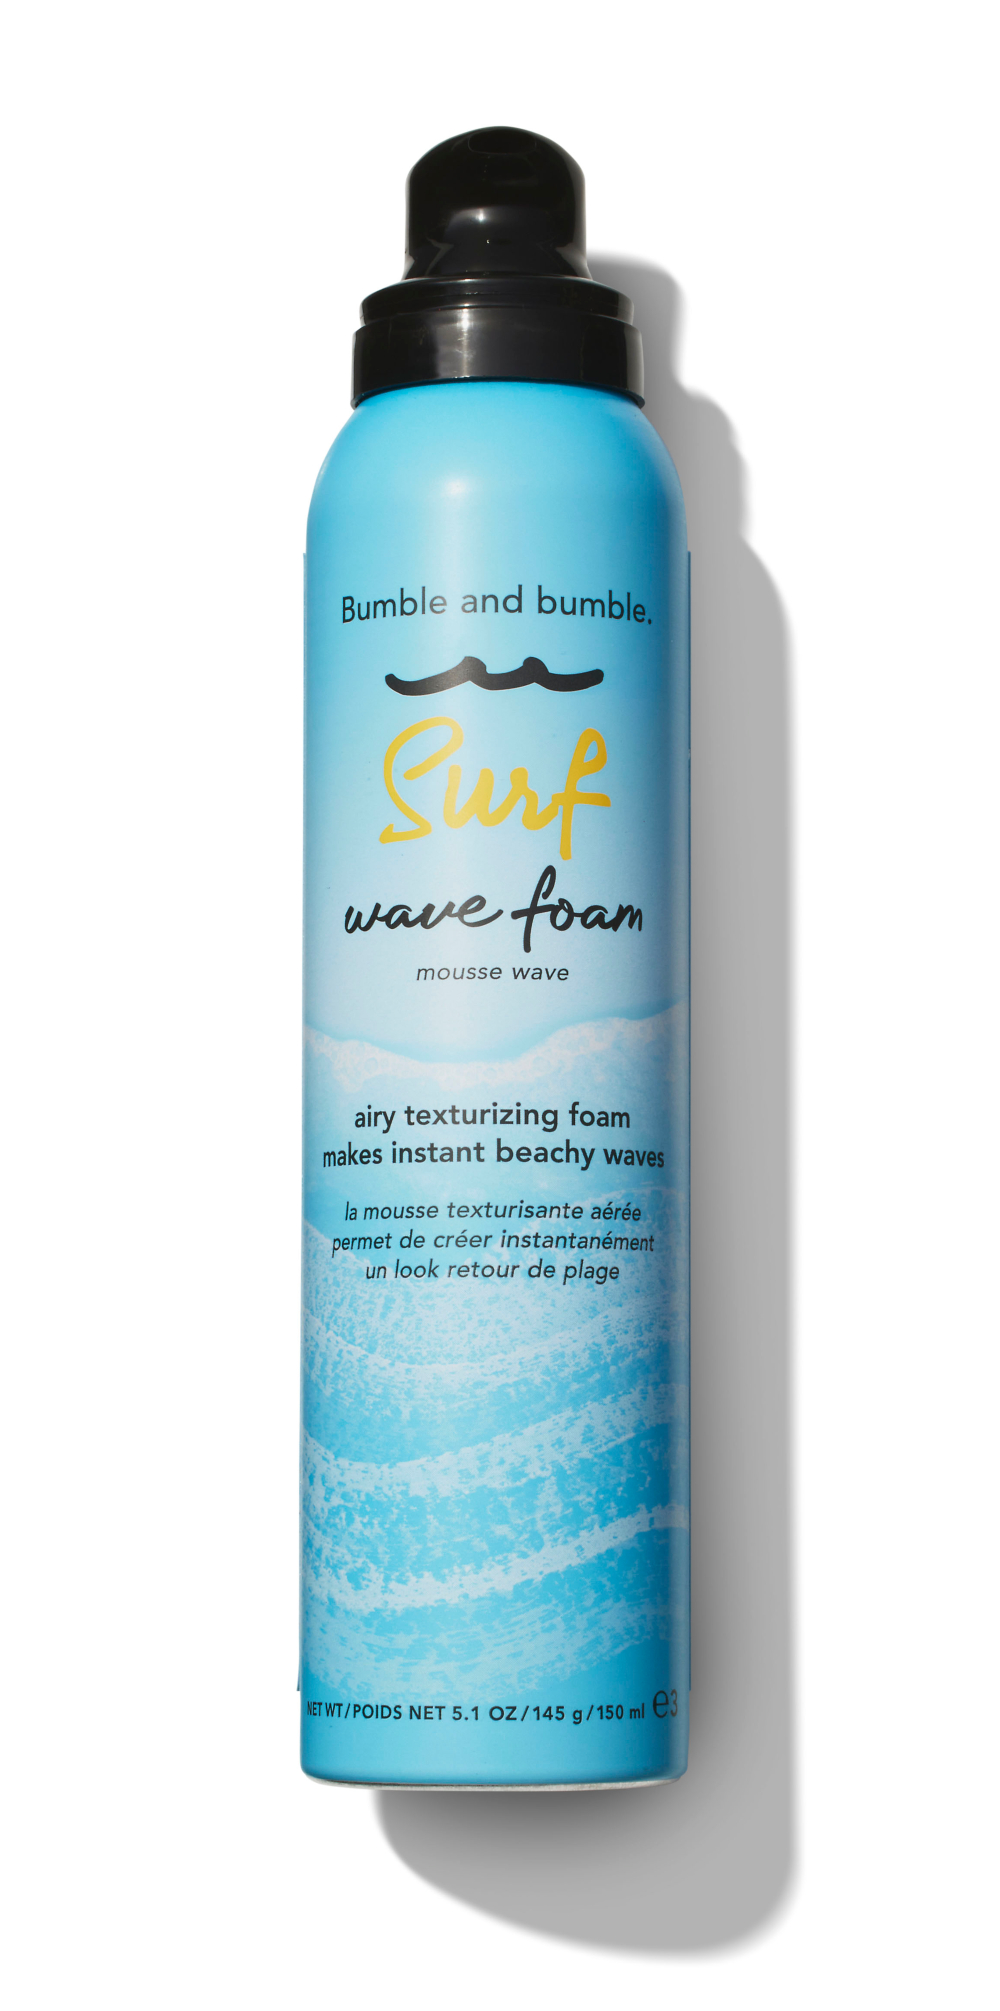 Bumble and Bumble Surf Wave Foam, $44.